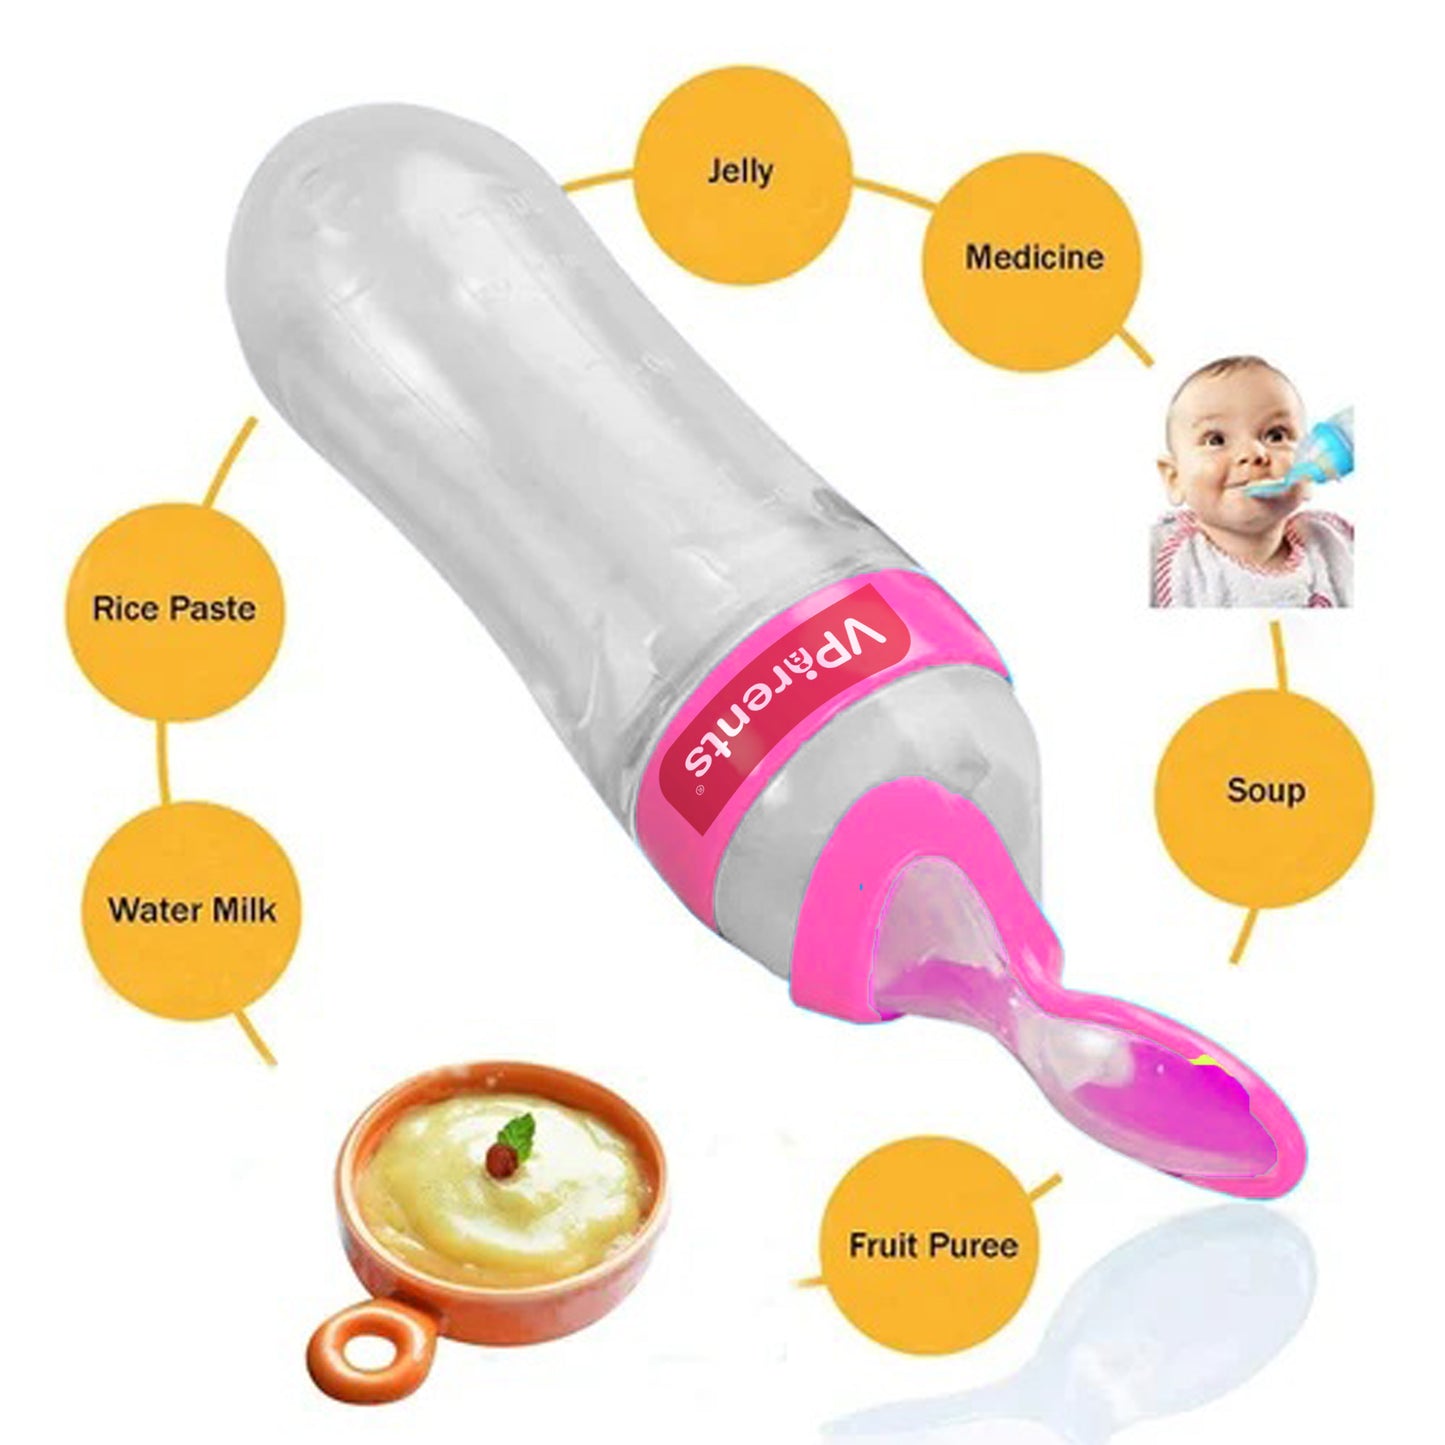 Vparents Food Feeding Spoon with Squeezy Food Grade Silicone Feeder Bottle, for Infant Baby, 90ml, BPA Free Assorted Colour -Pack of 1